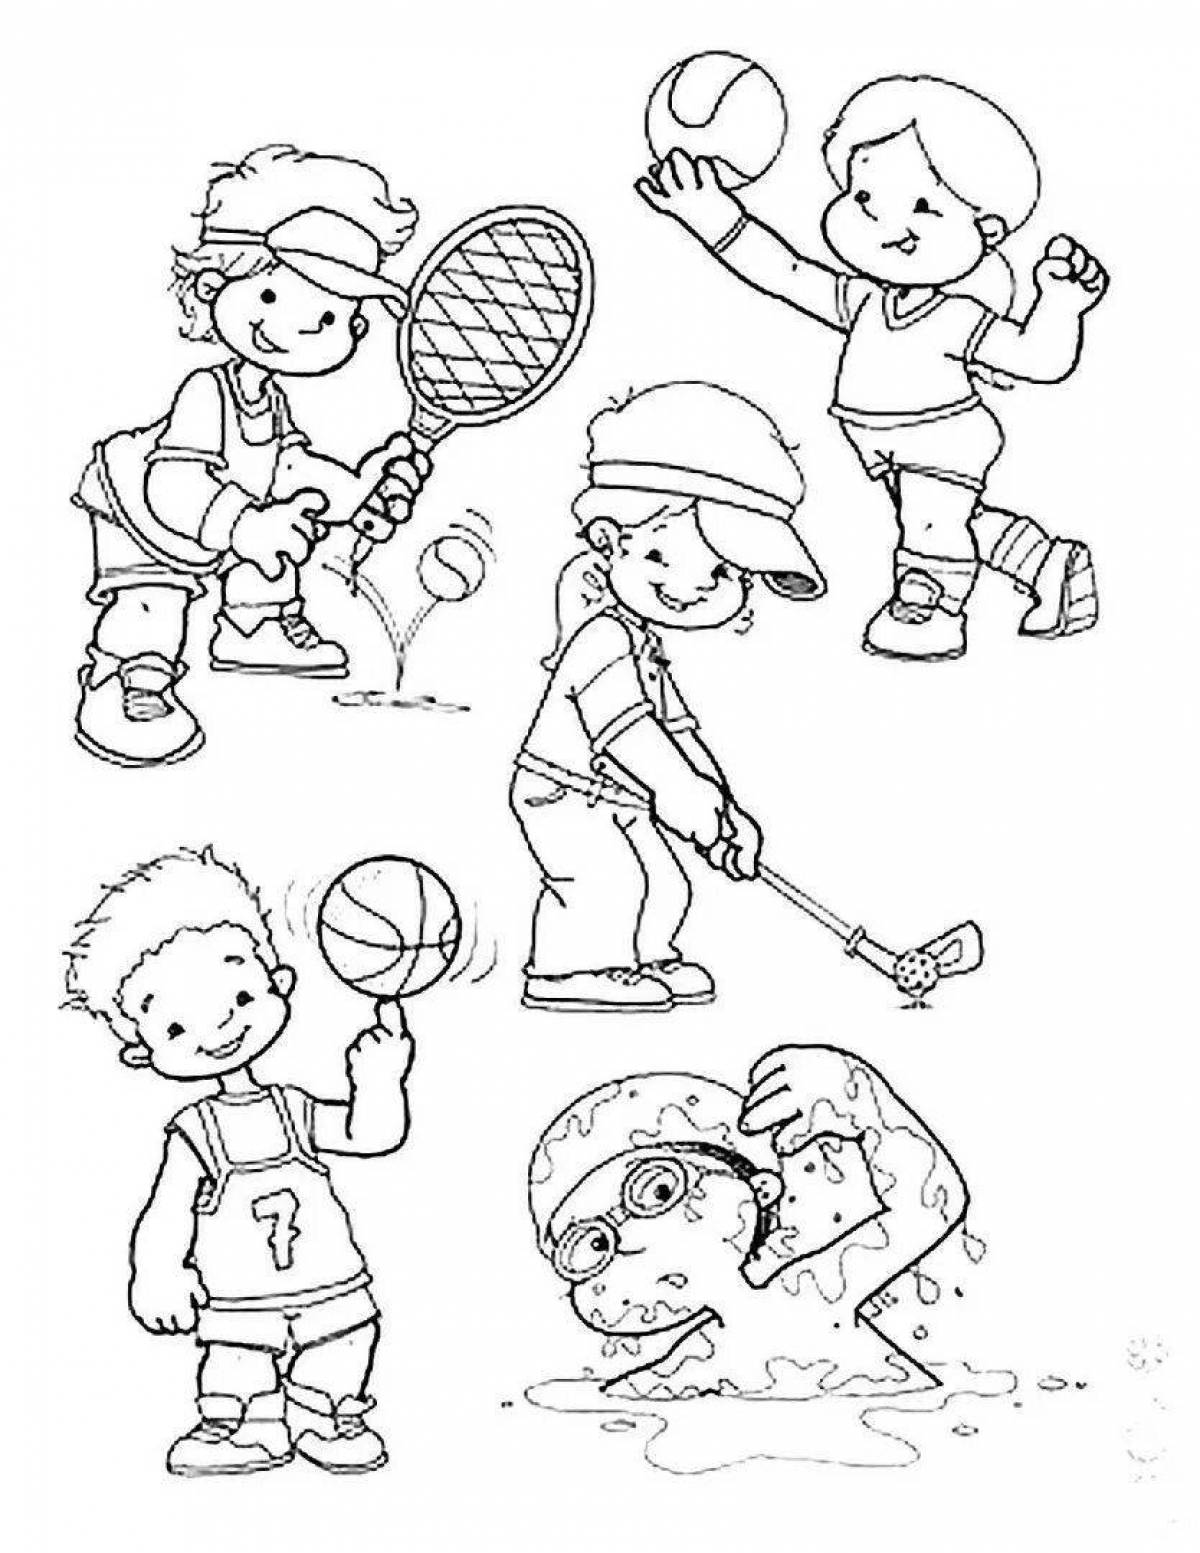 Fun coloring book for physical education and sports